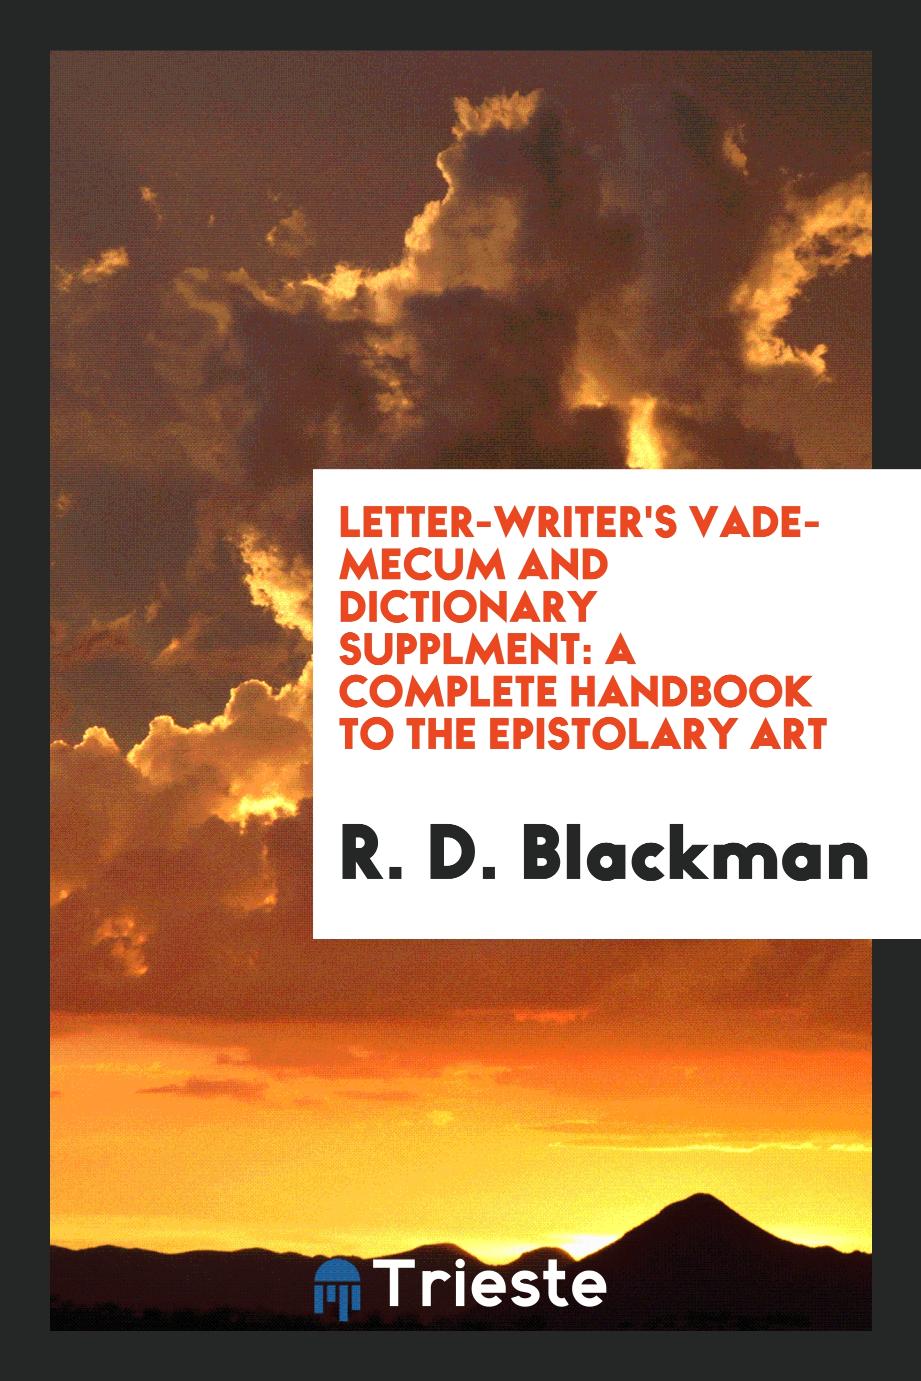 Letter-writer's Vade-mecum and Dictionary Supplment: A Complete Handbook to the Epistolary Art